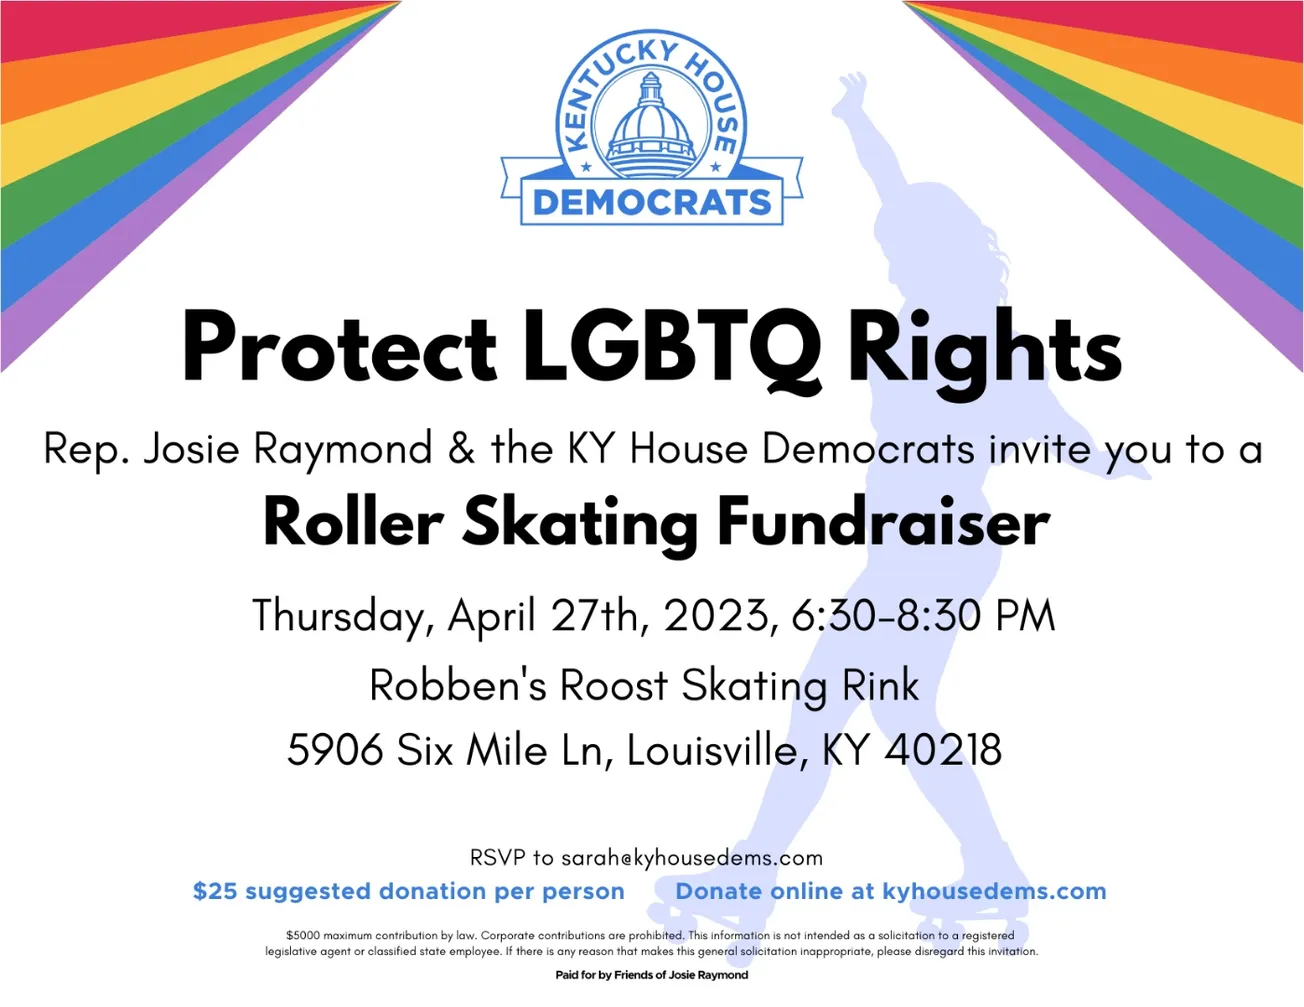 KY House Dems to hold ‘Roller-Skating Fundraiser’ for LGBTQ rights